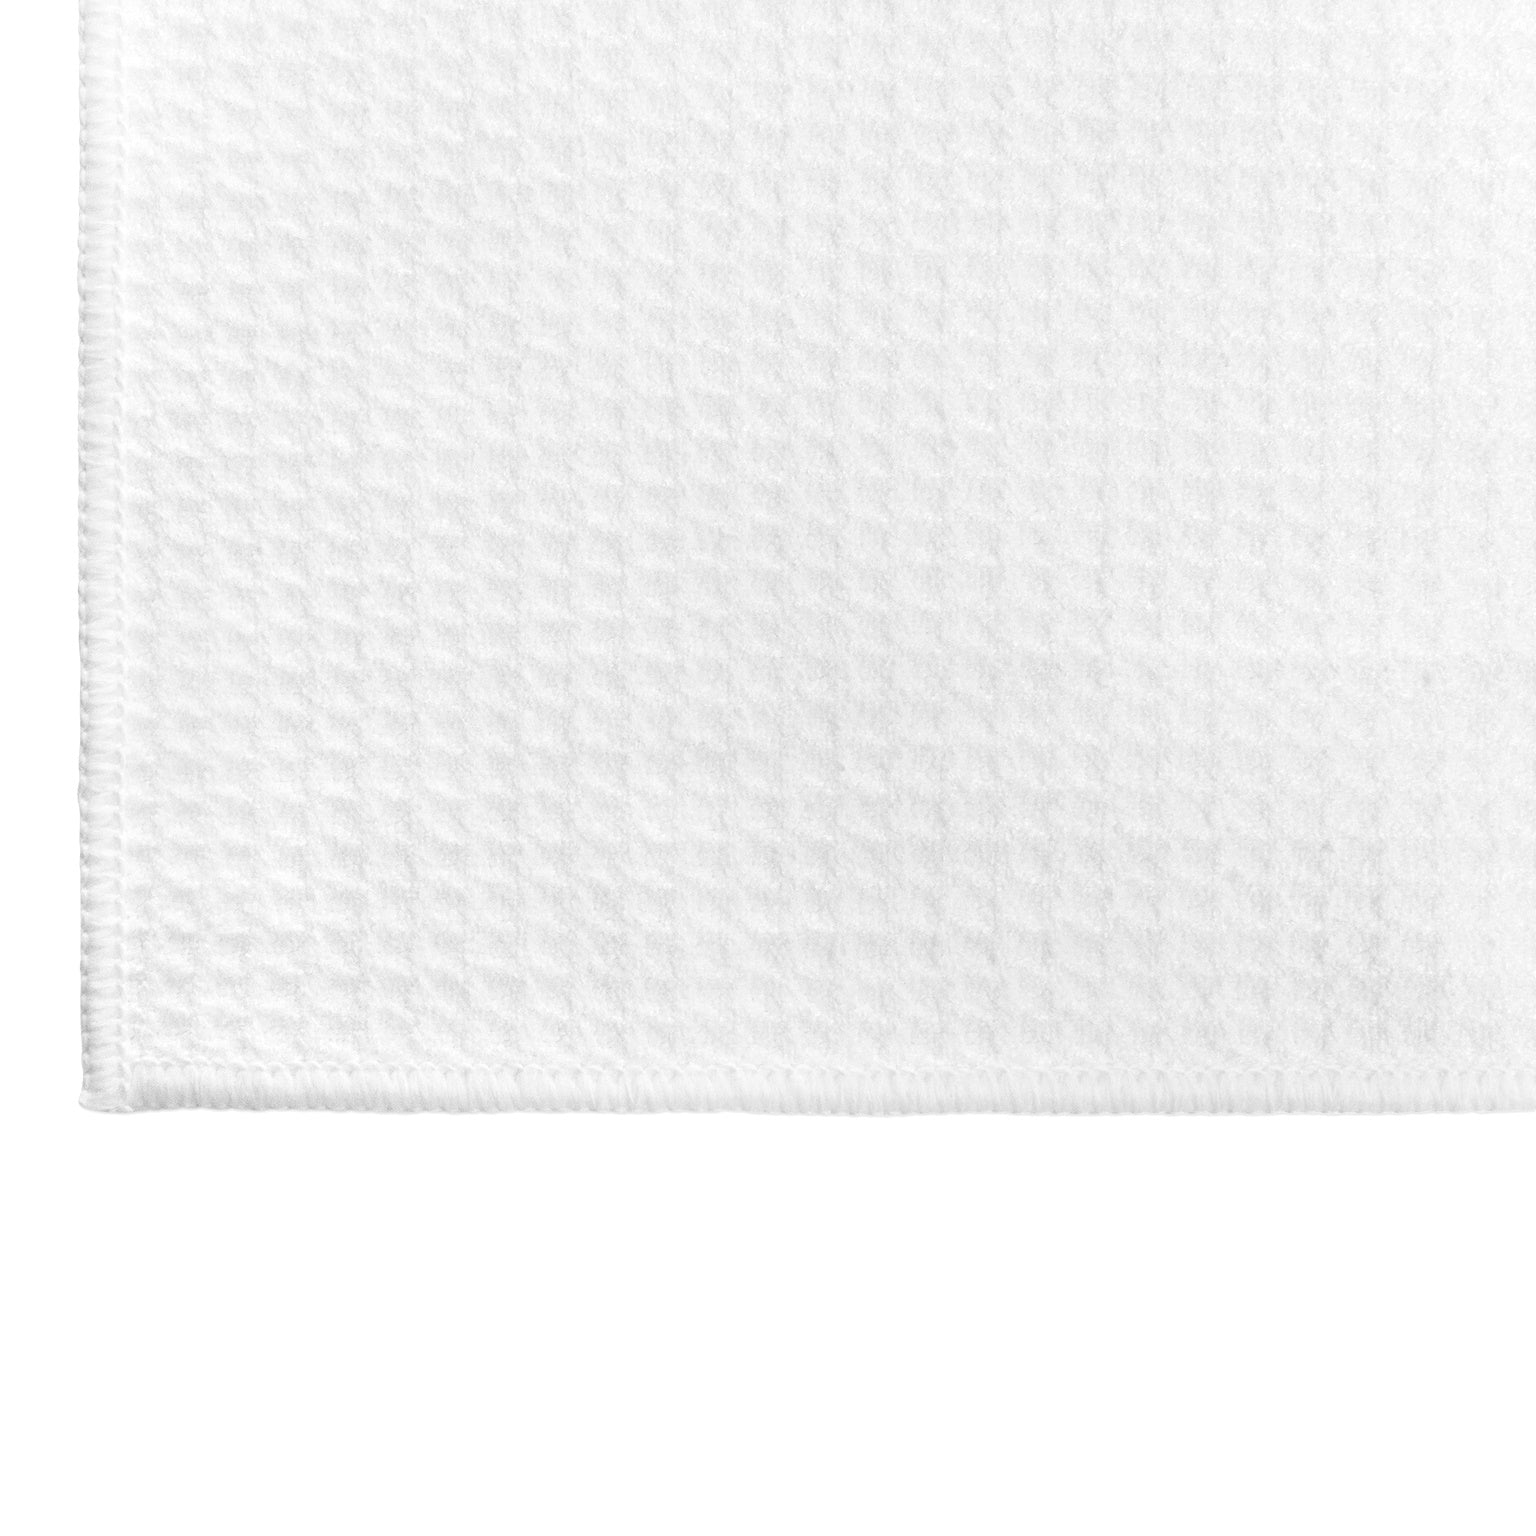 Kitchen Towels - Bulk Microfiber Waffle Weave Towels | 16 x 24 in. (144  Count) | Absorbent,No Lint, Thick, Reusable, Commercial, Soft, Hand, Tea,  Bar